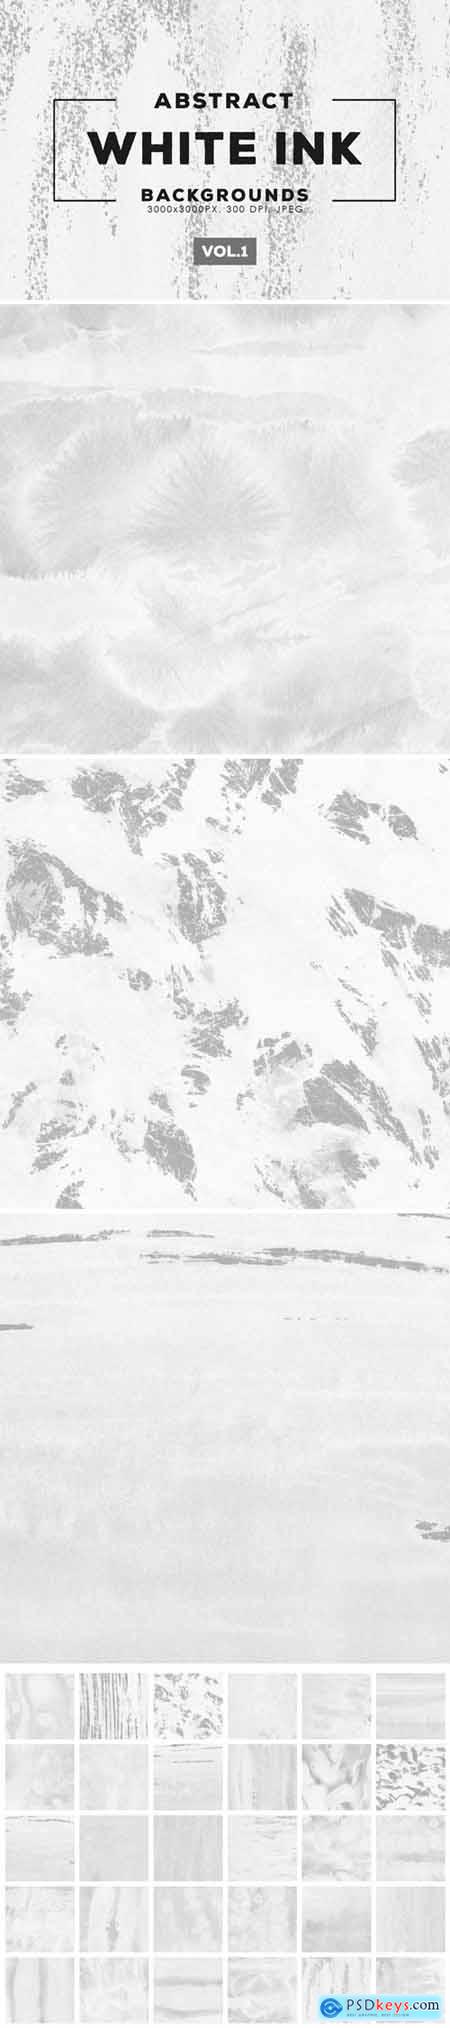 White Ink Backgrounds Vol.1